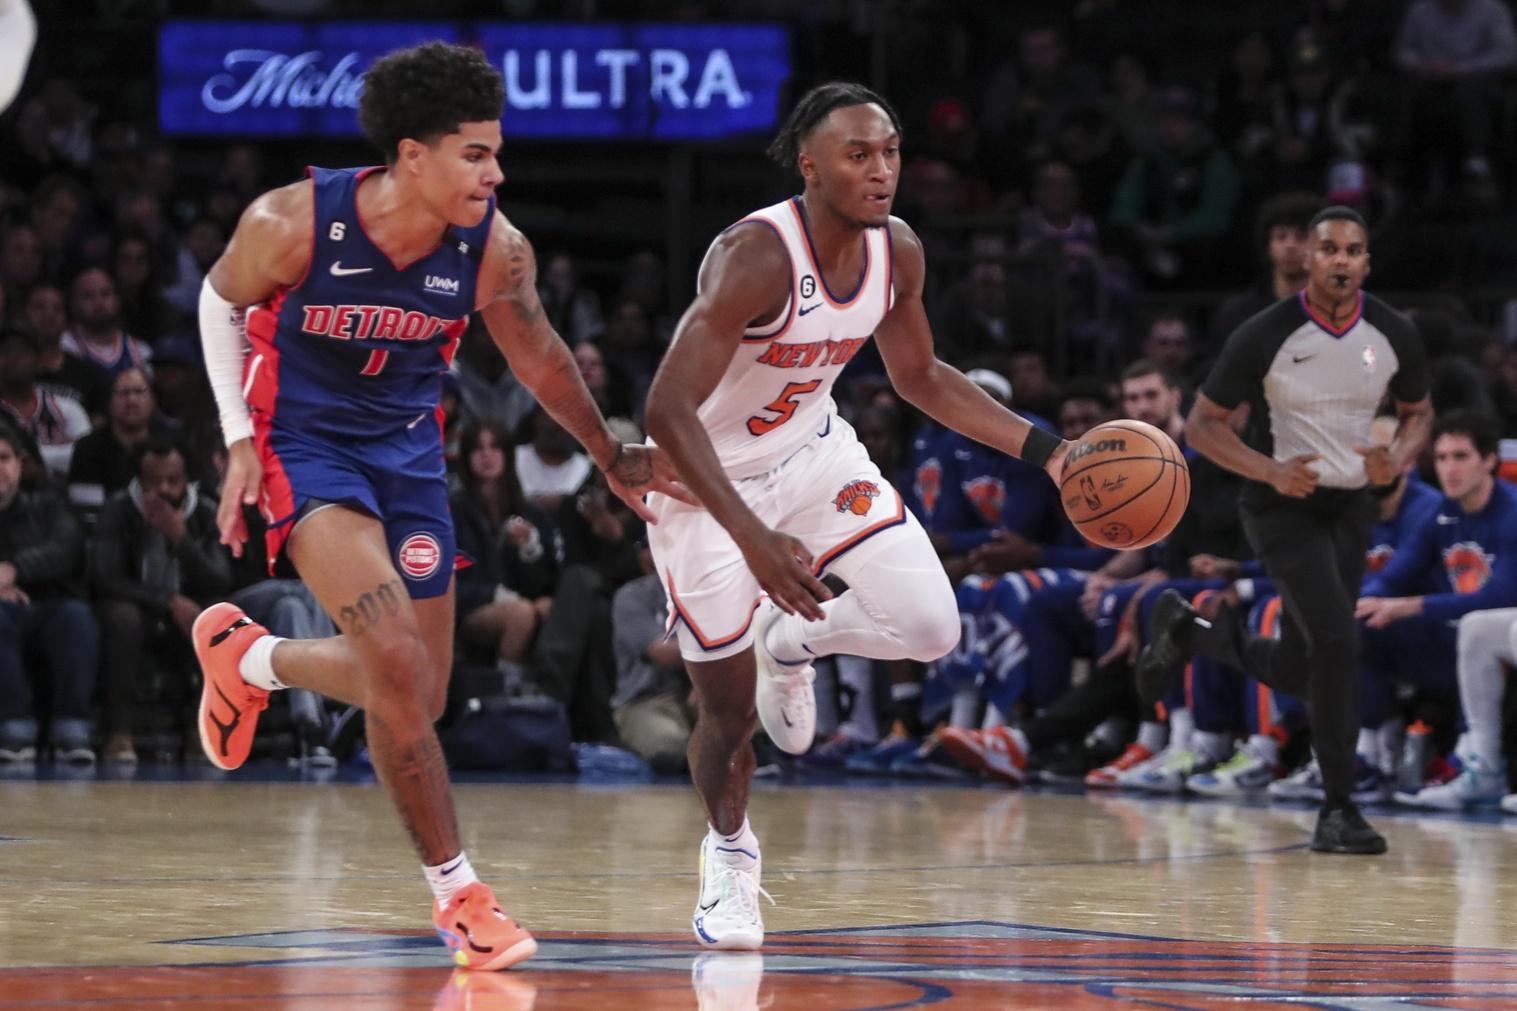 New York Knicks guard Immanuel Quickley (5) drives past Detroit Pistons guard Killian Hayes (7) in the fourth quarter at Madison Square Garden. / Wendell Cruz-USA TODAY Sports